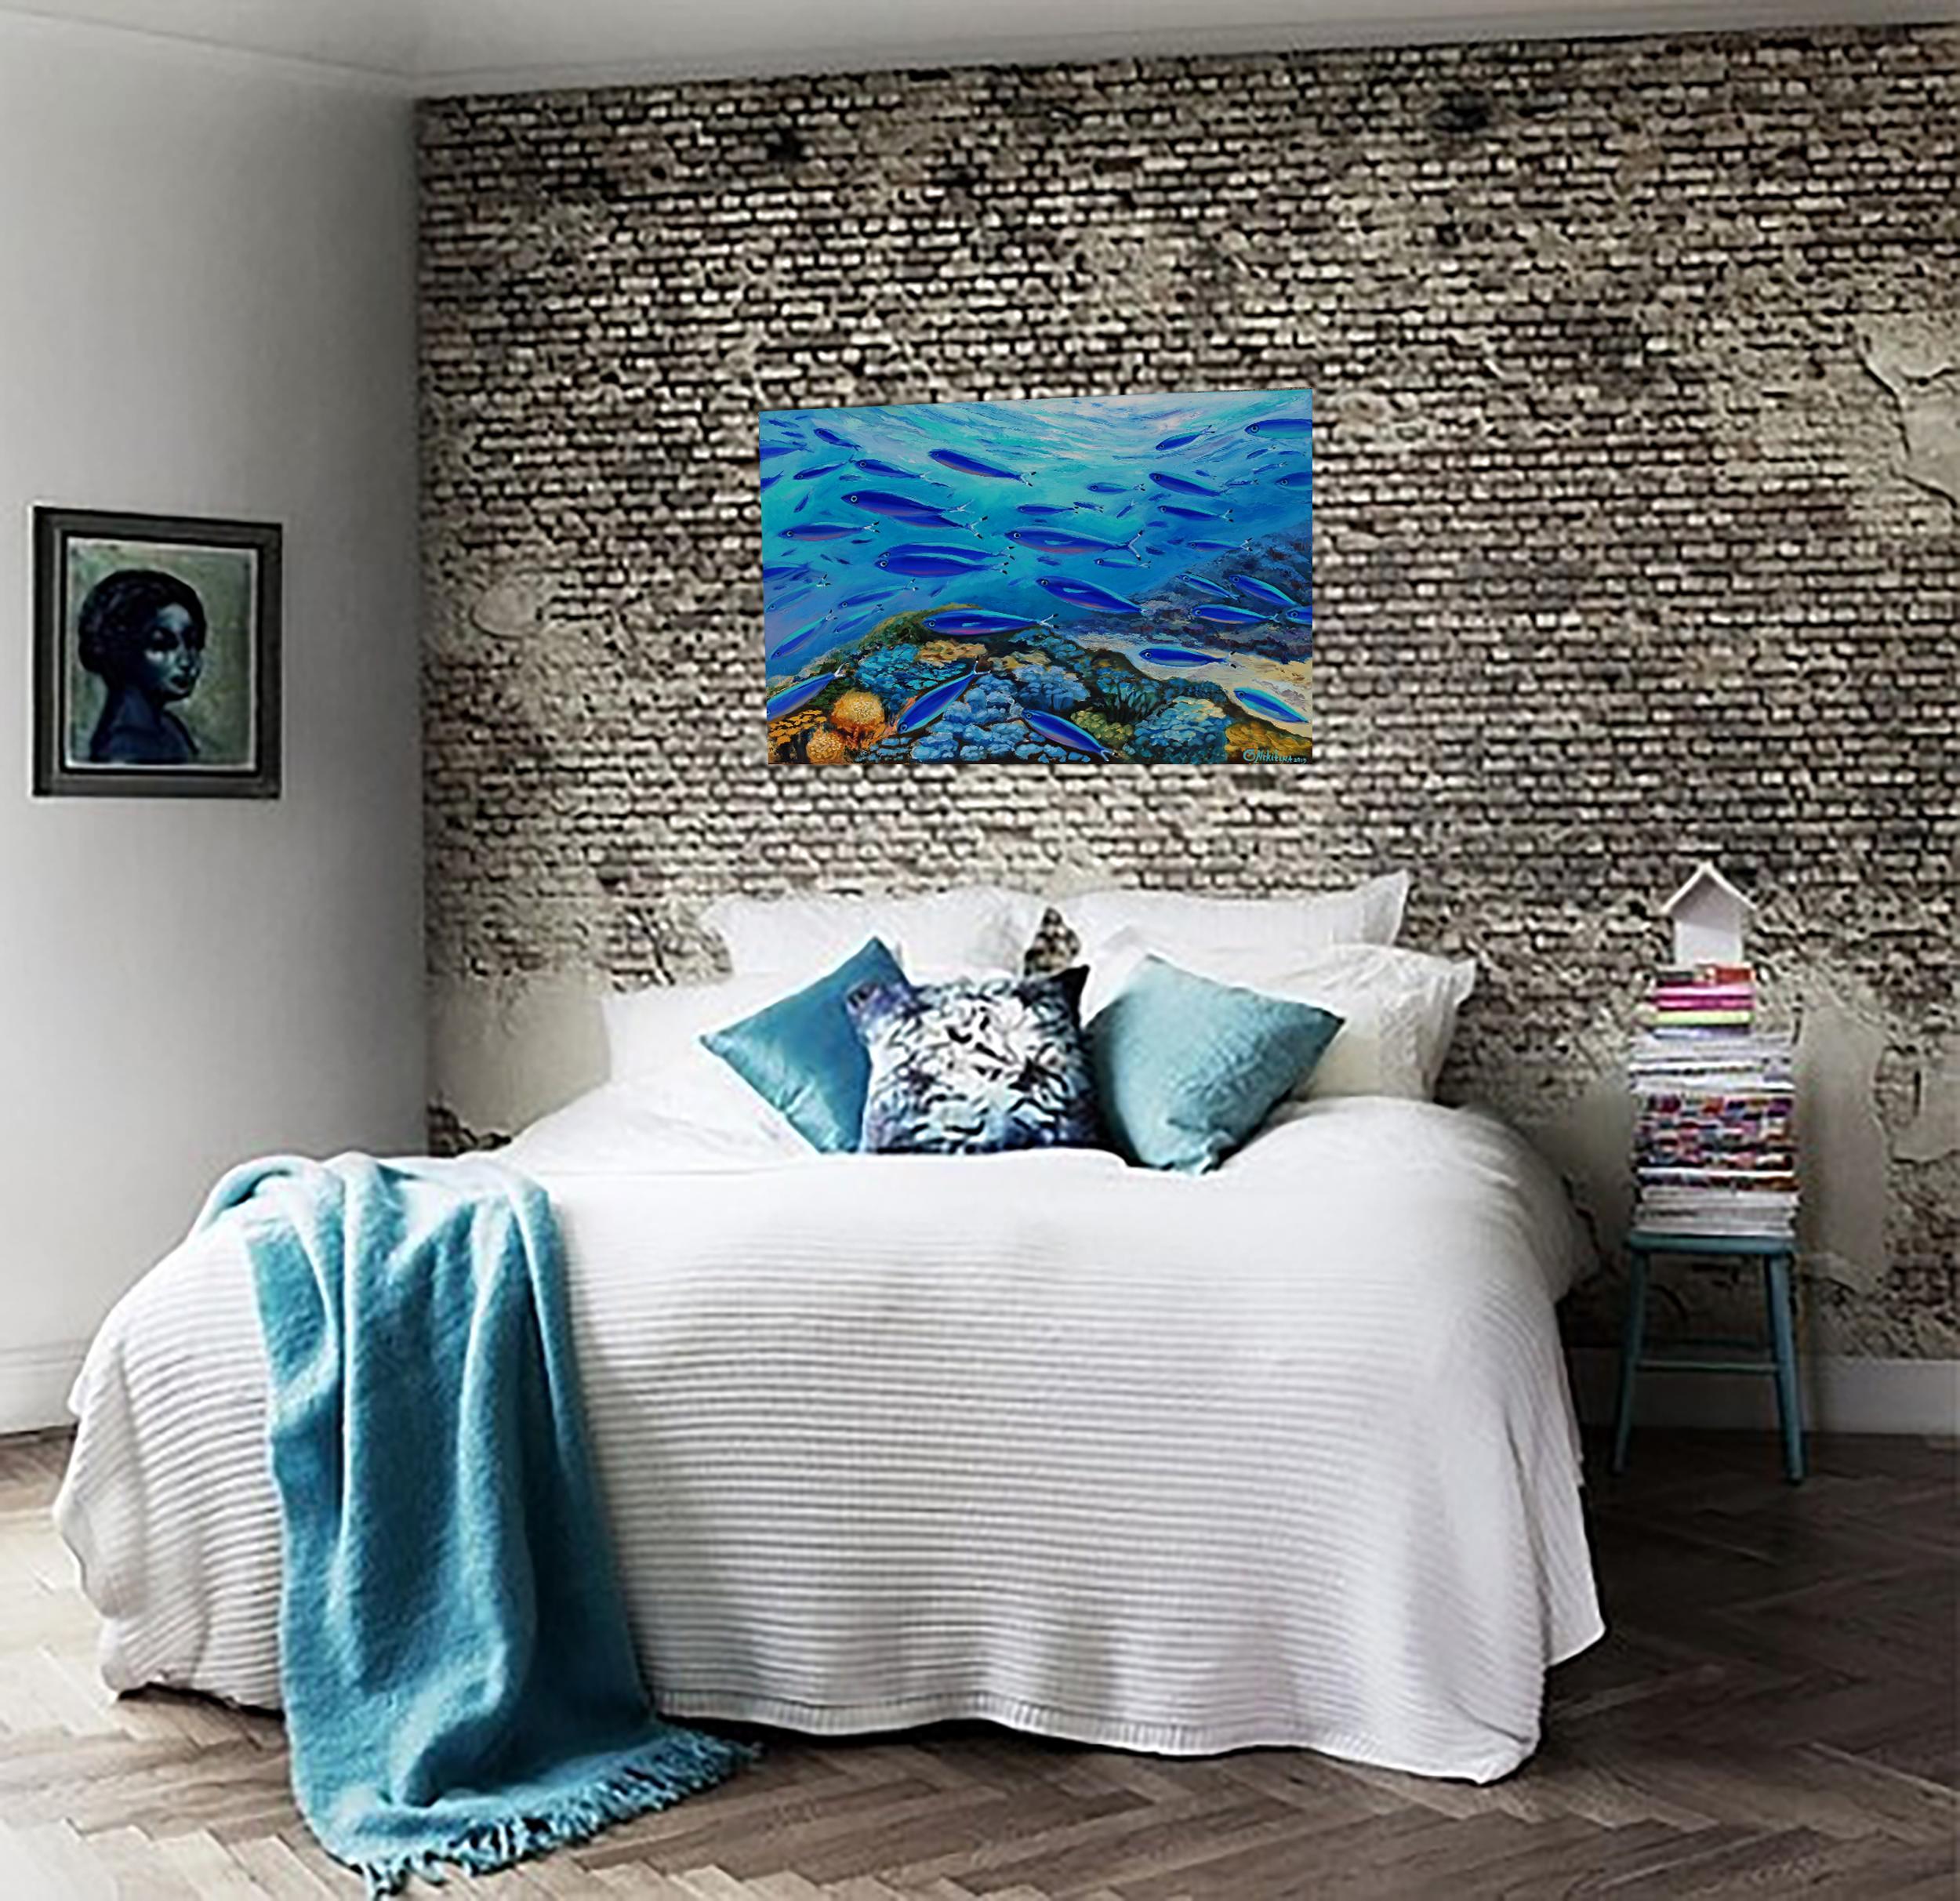 Blue Fish in Tropical Coral Reef Giclèe Pring with hand touch by Olga Nikitina 8